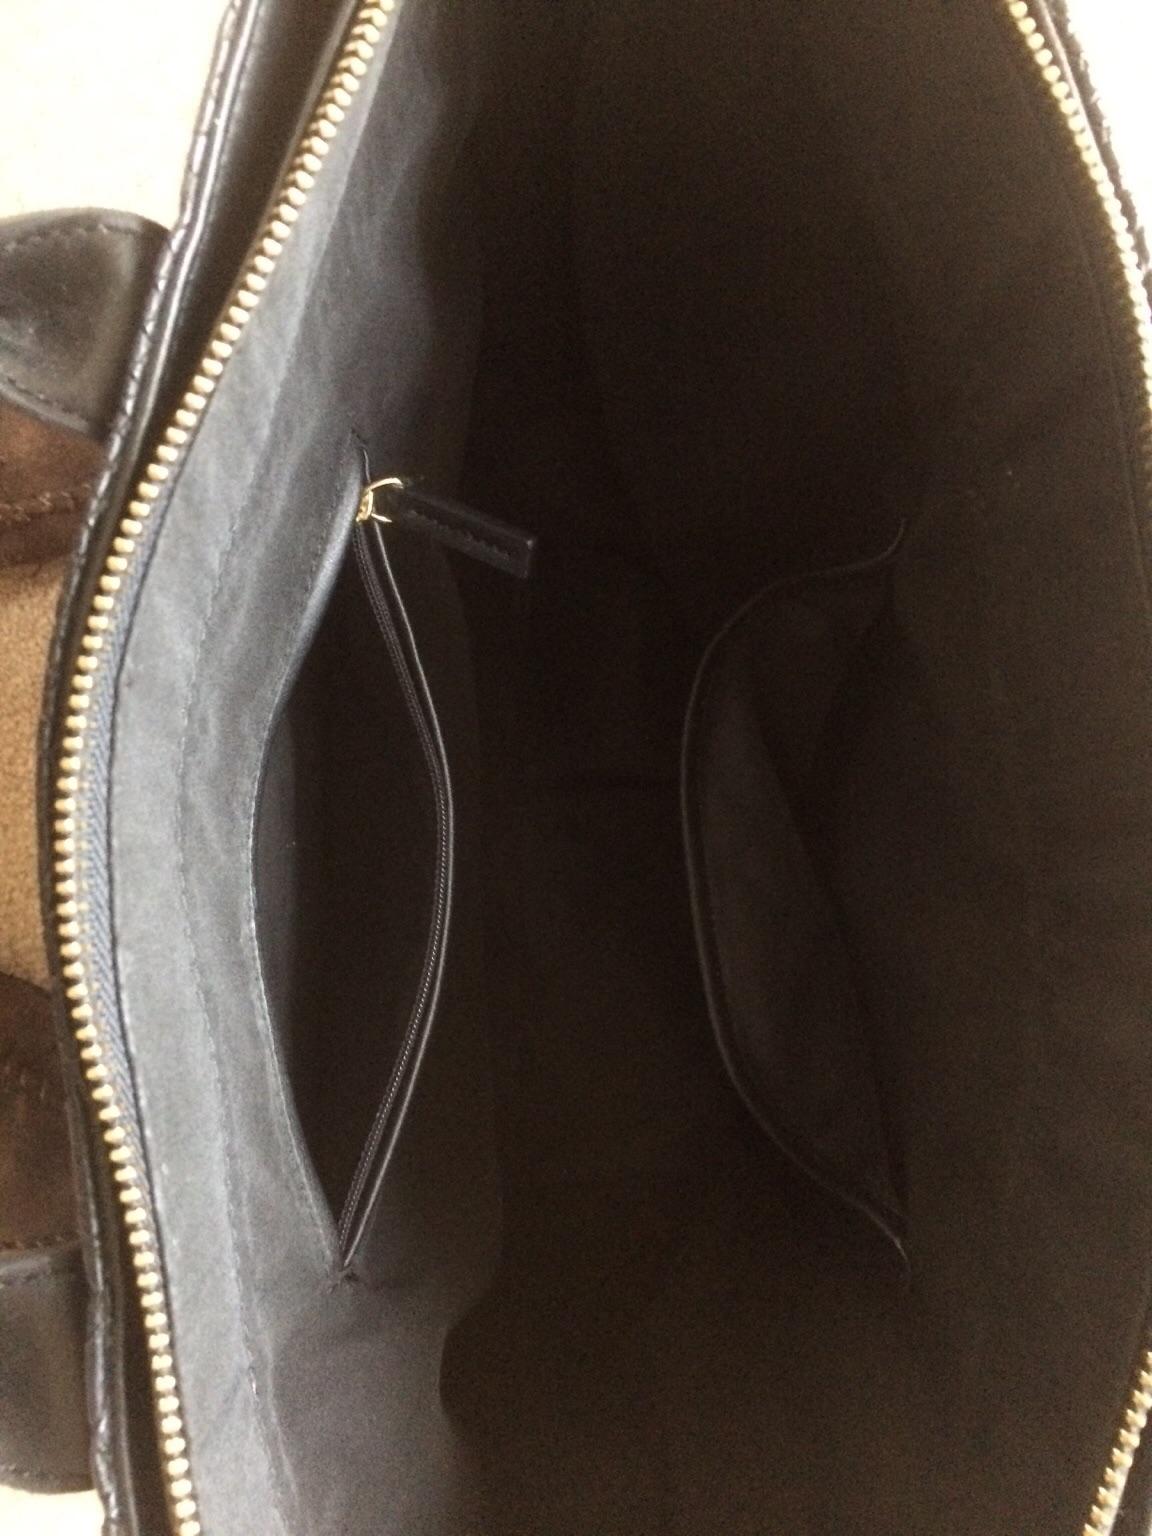 Handbag PIED A TERRE black leather in GU24 Chobham for £10.00 for sale ...